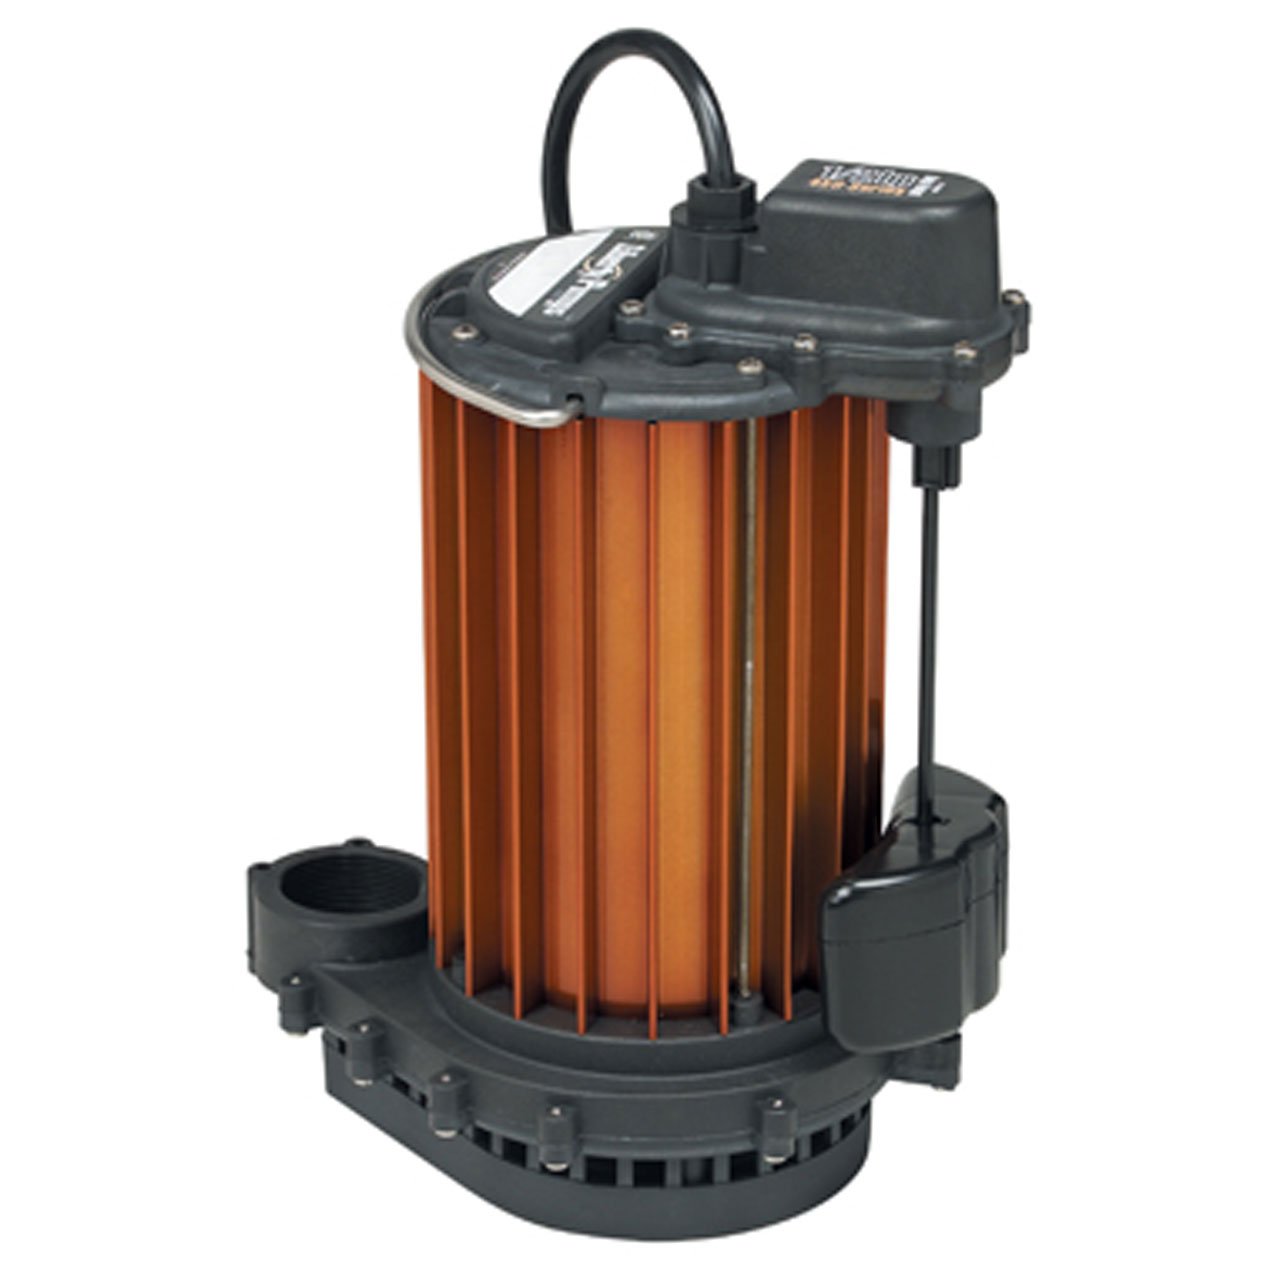 Liberty Pumps 237 1/3 HP Submersible Sump Pump with Vertical Magnetic Float